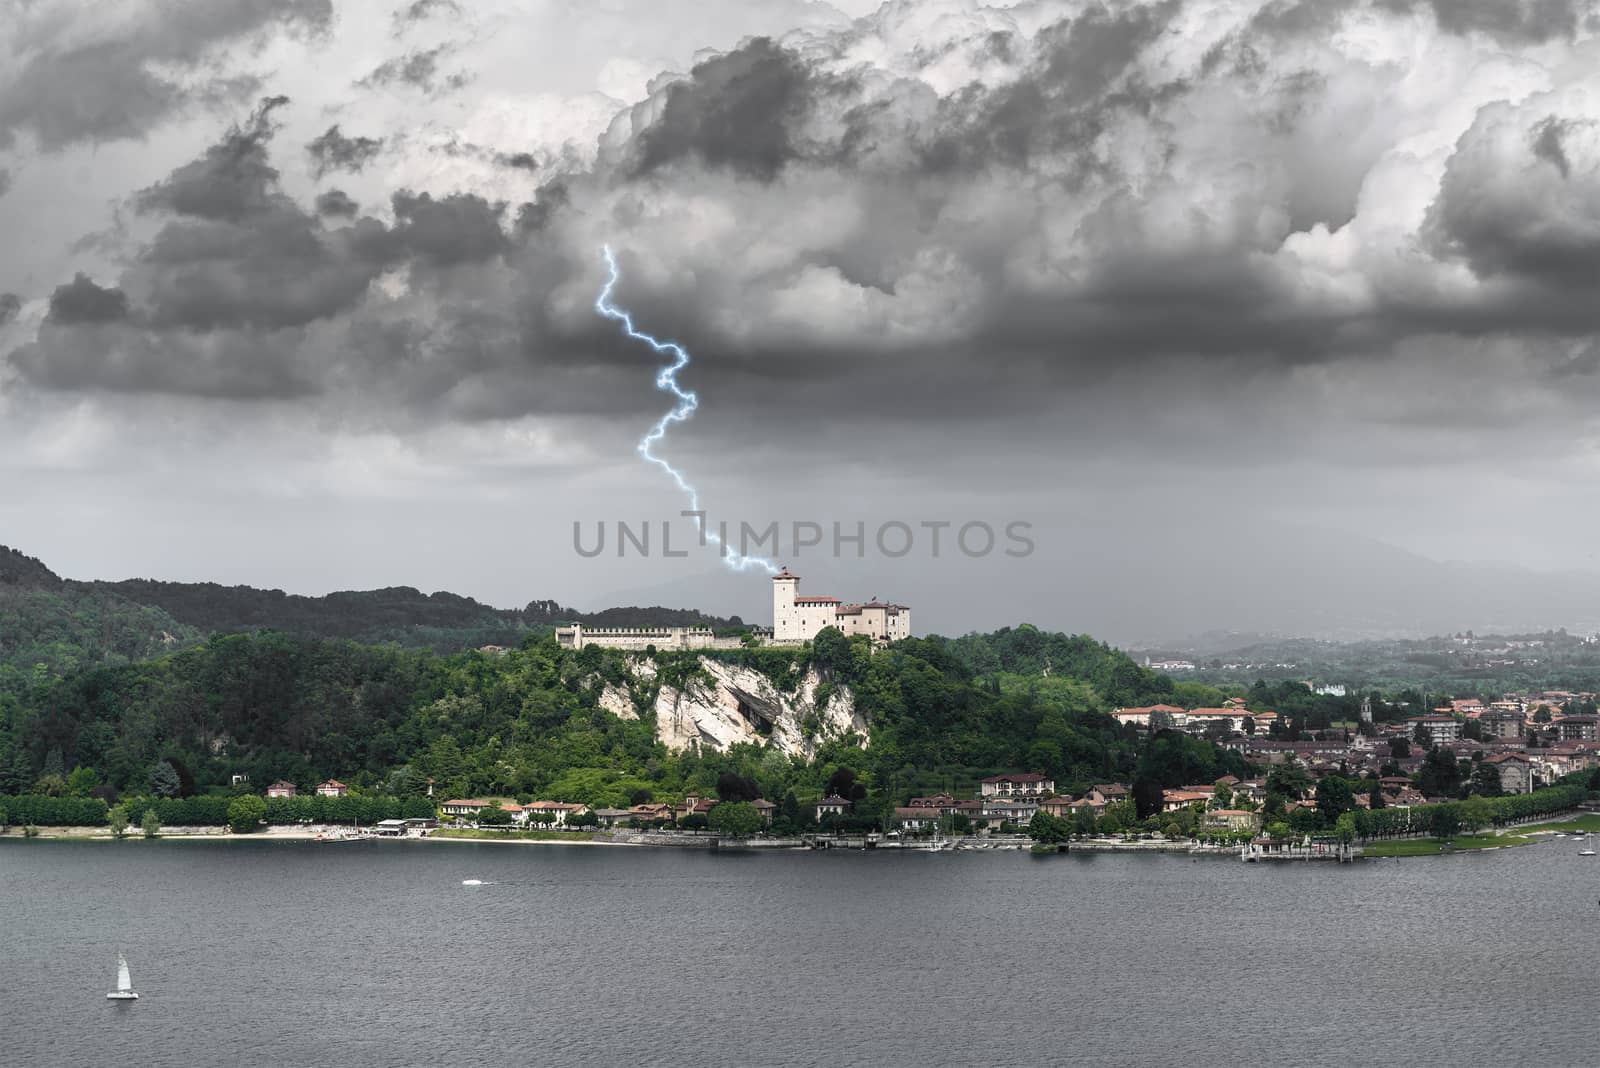 Thunderstorm and lightning over the Fortress of Angera, Varese